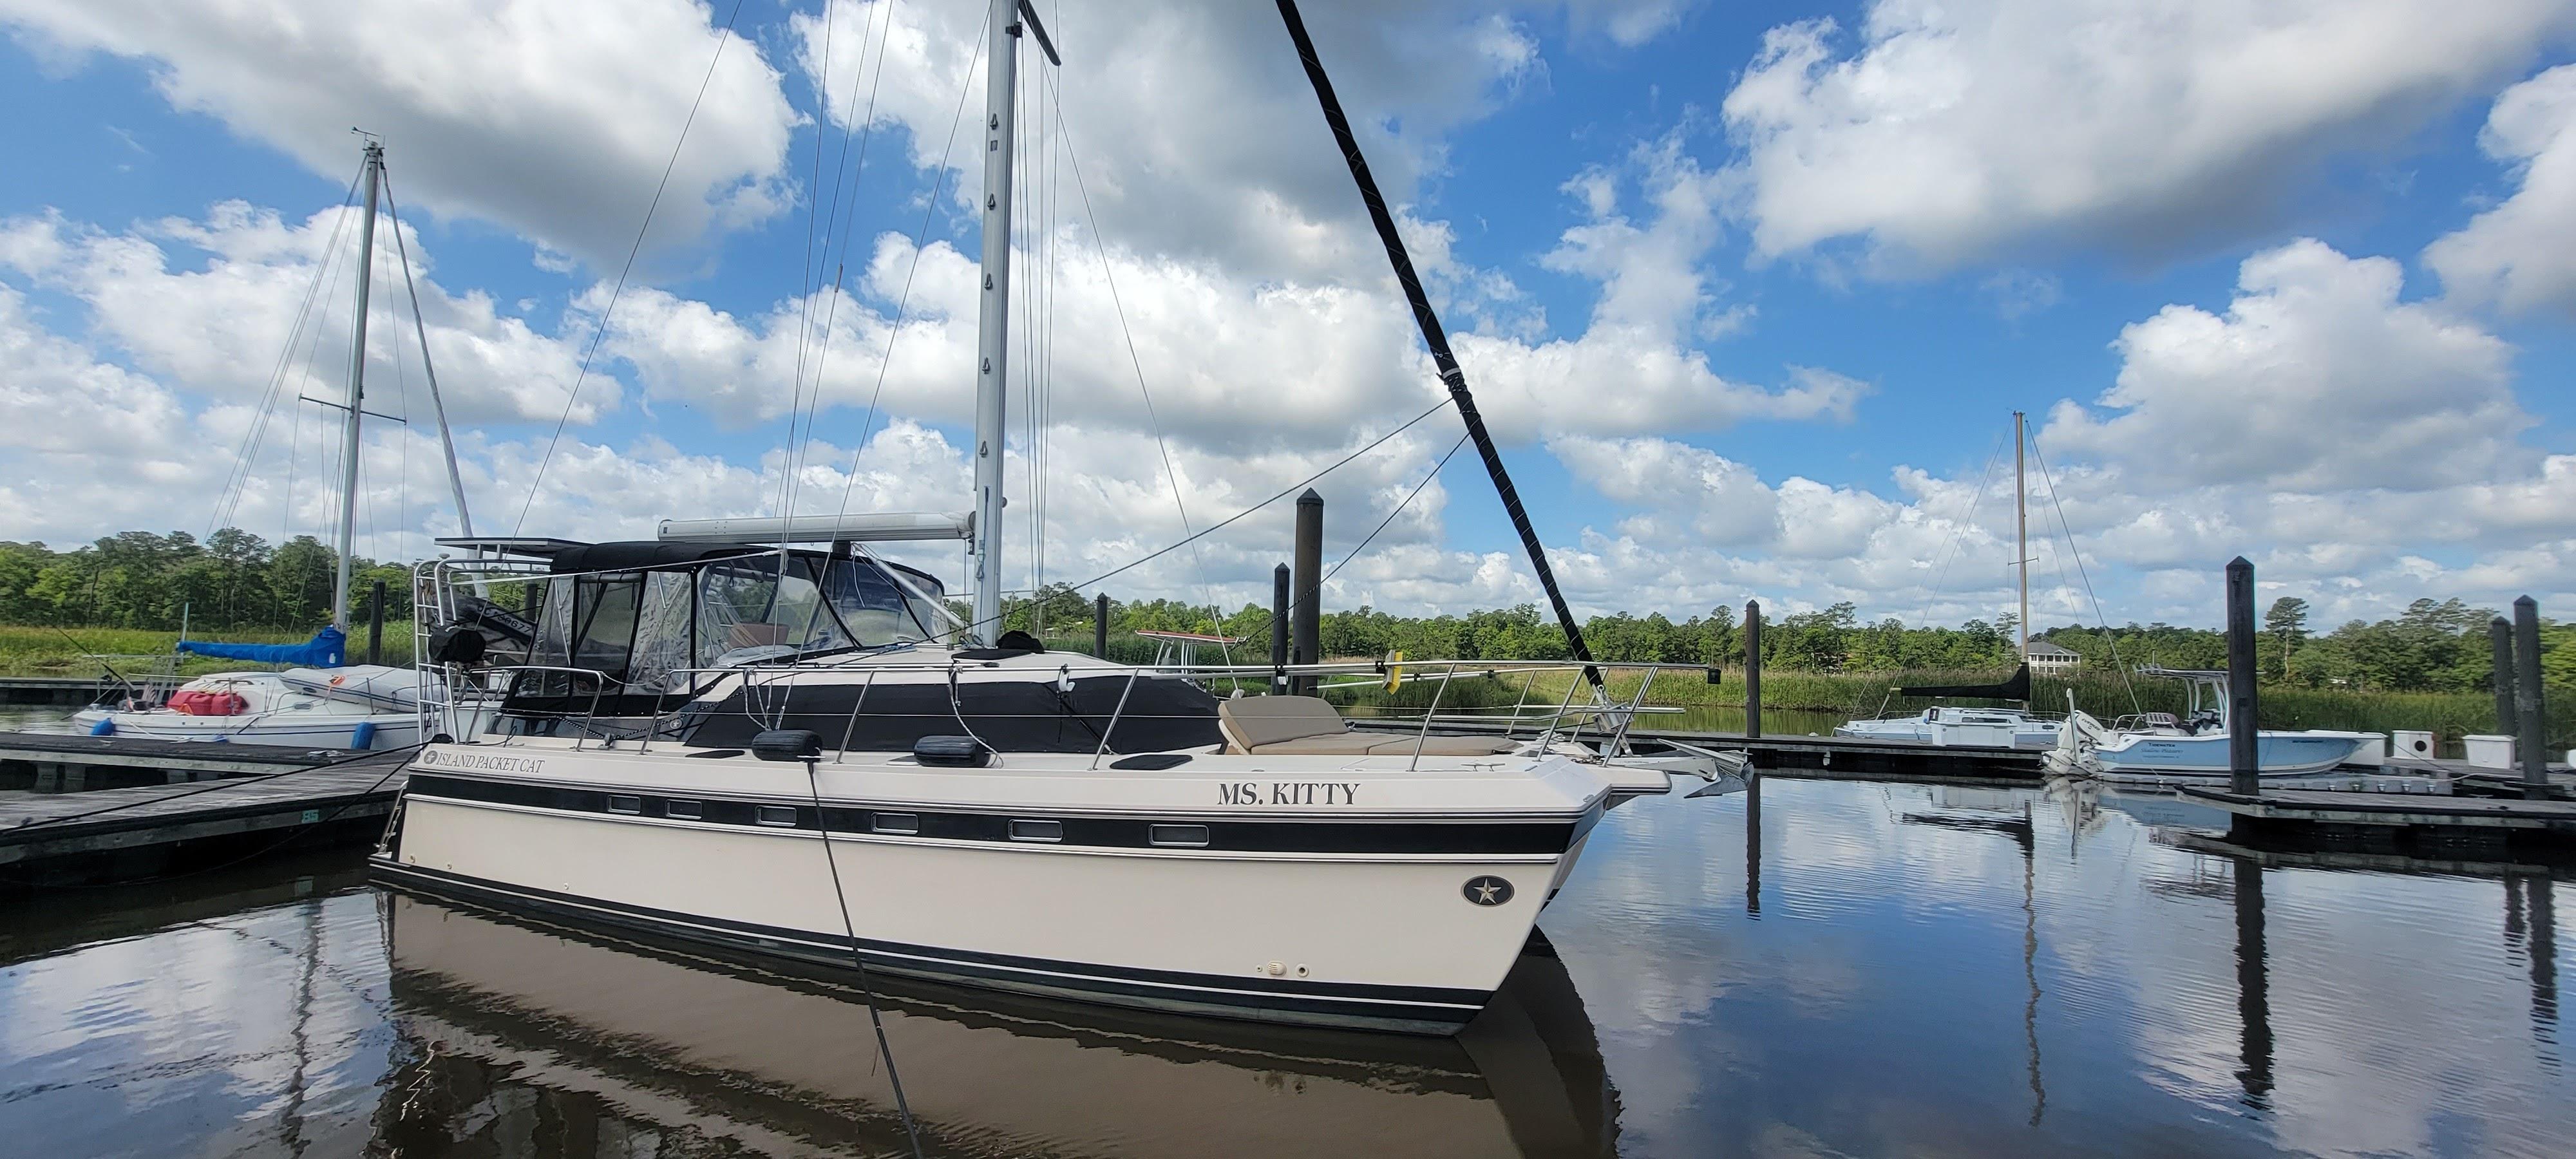 1995 Island Packet Cat 35 Ms. Kitty | 35ft